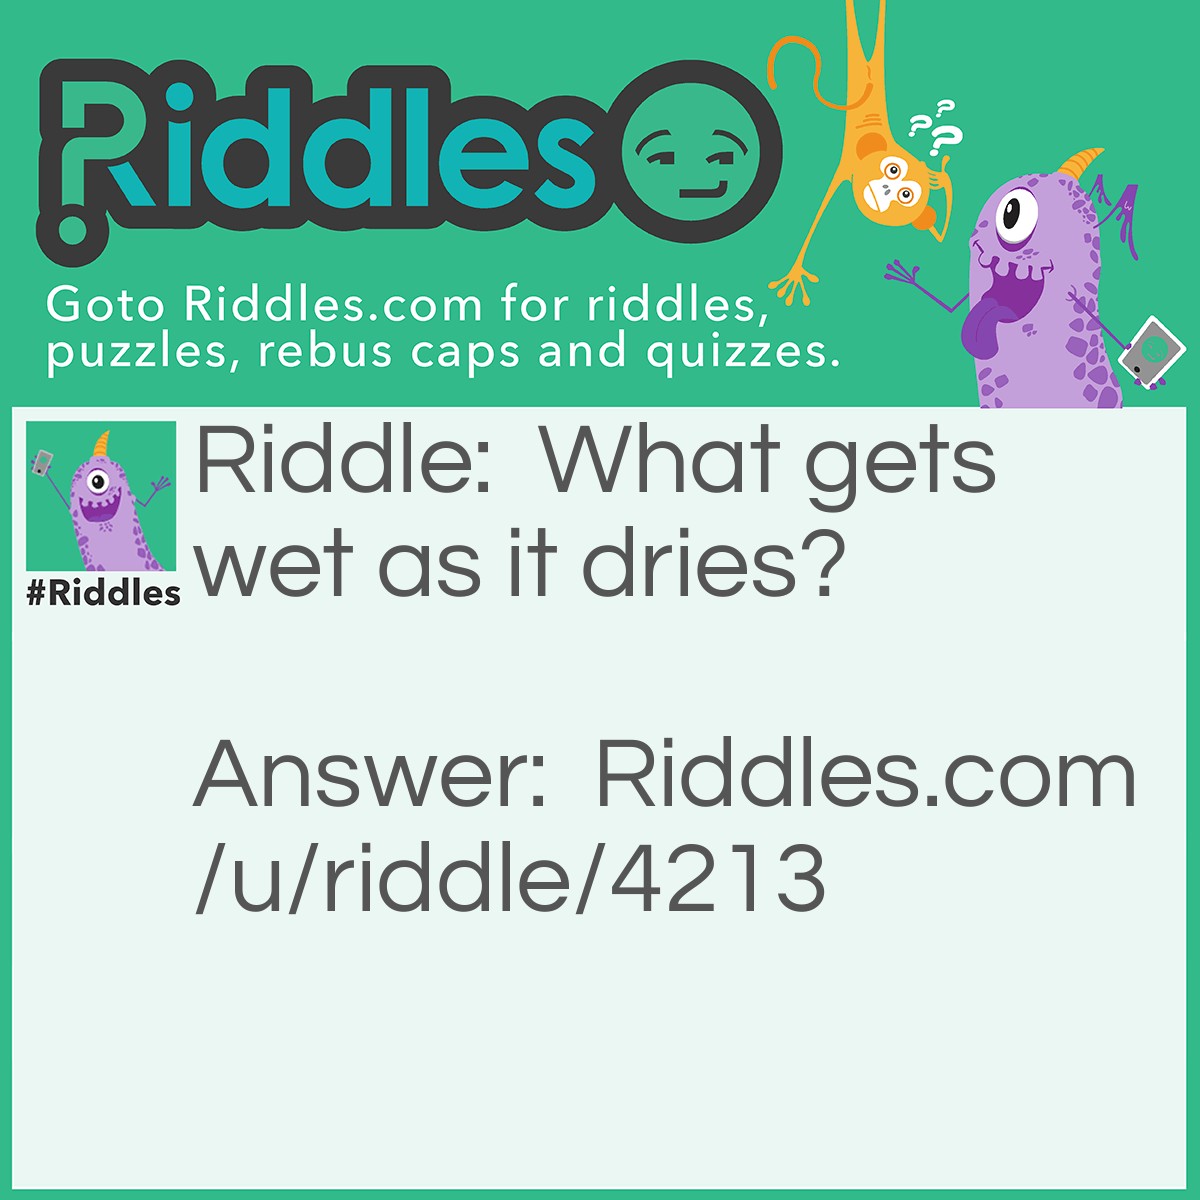 Riddle: What gets wet as it dries? Answer: A Towel.